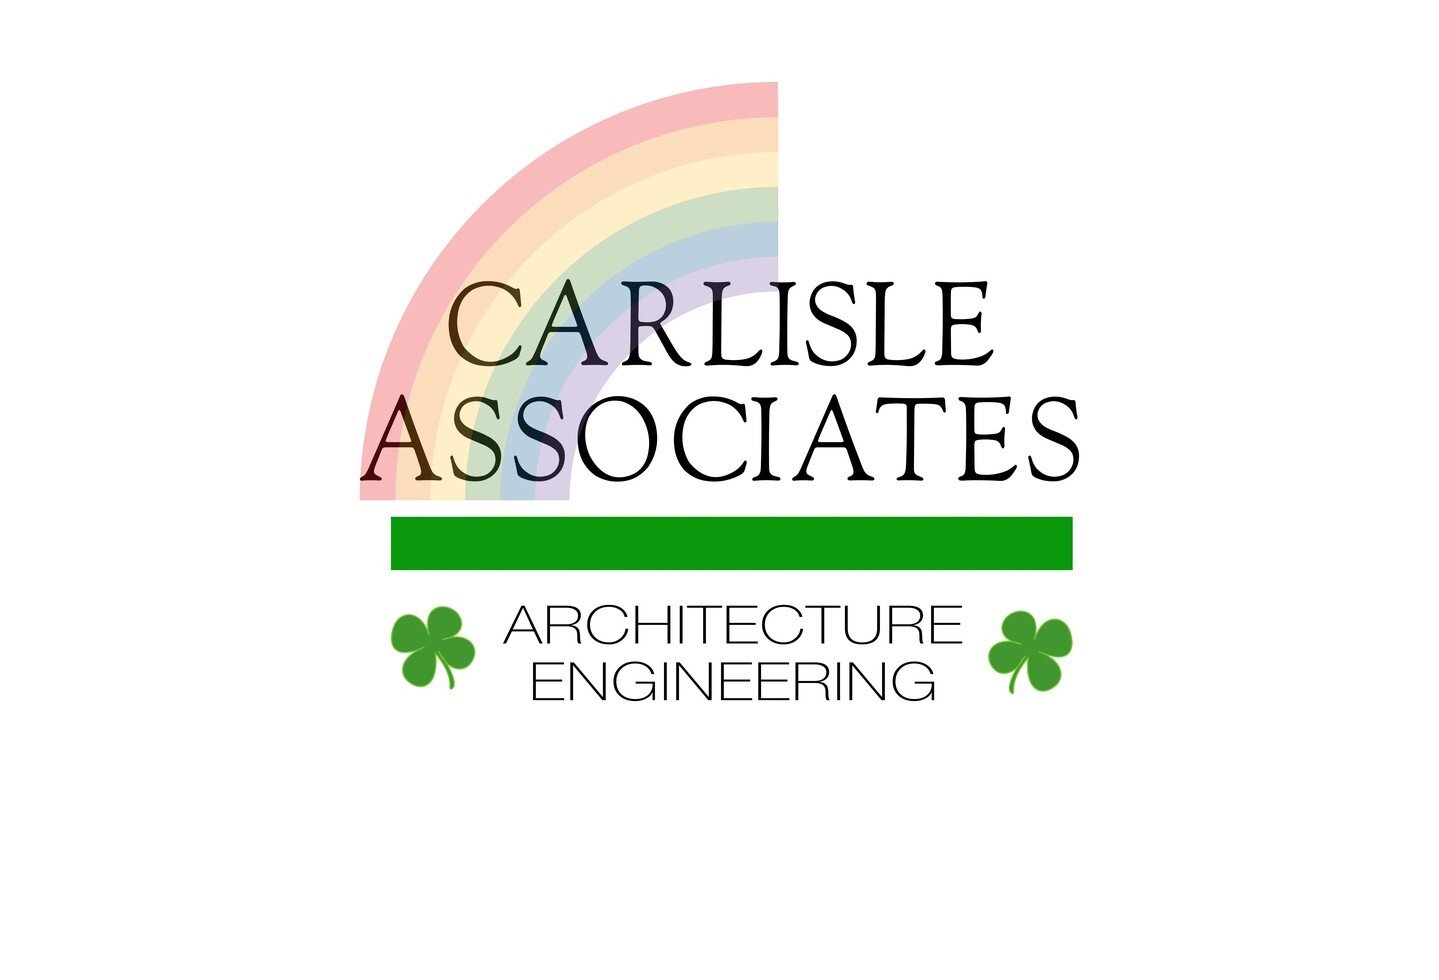 Happy St. Patrick's Day from the Carlisle Associates team!

&quot;For each petal on the shamrock, this brings a wish your way: Good health, good luck, and happiness for today and every day.&quot;